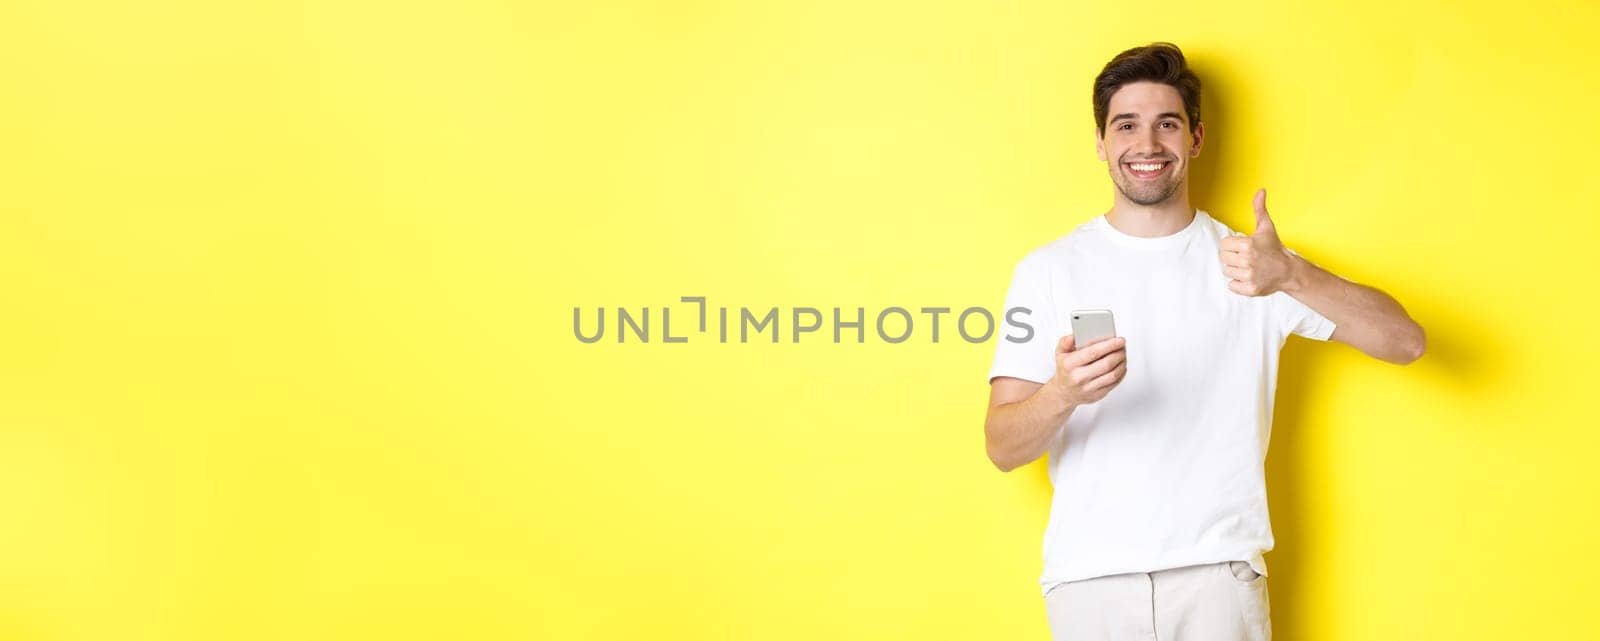 Happy satisfied man holding smartphone, showing thumb up in approval, recommend something online, standing over yellow background.